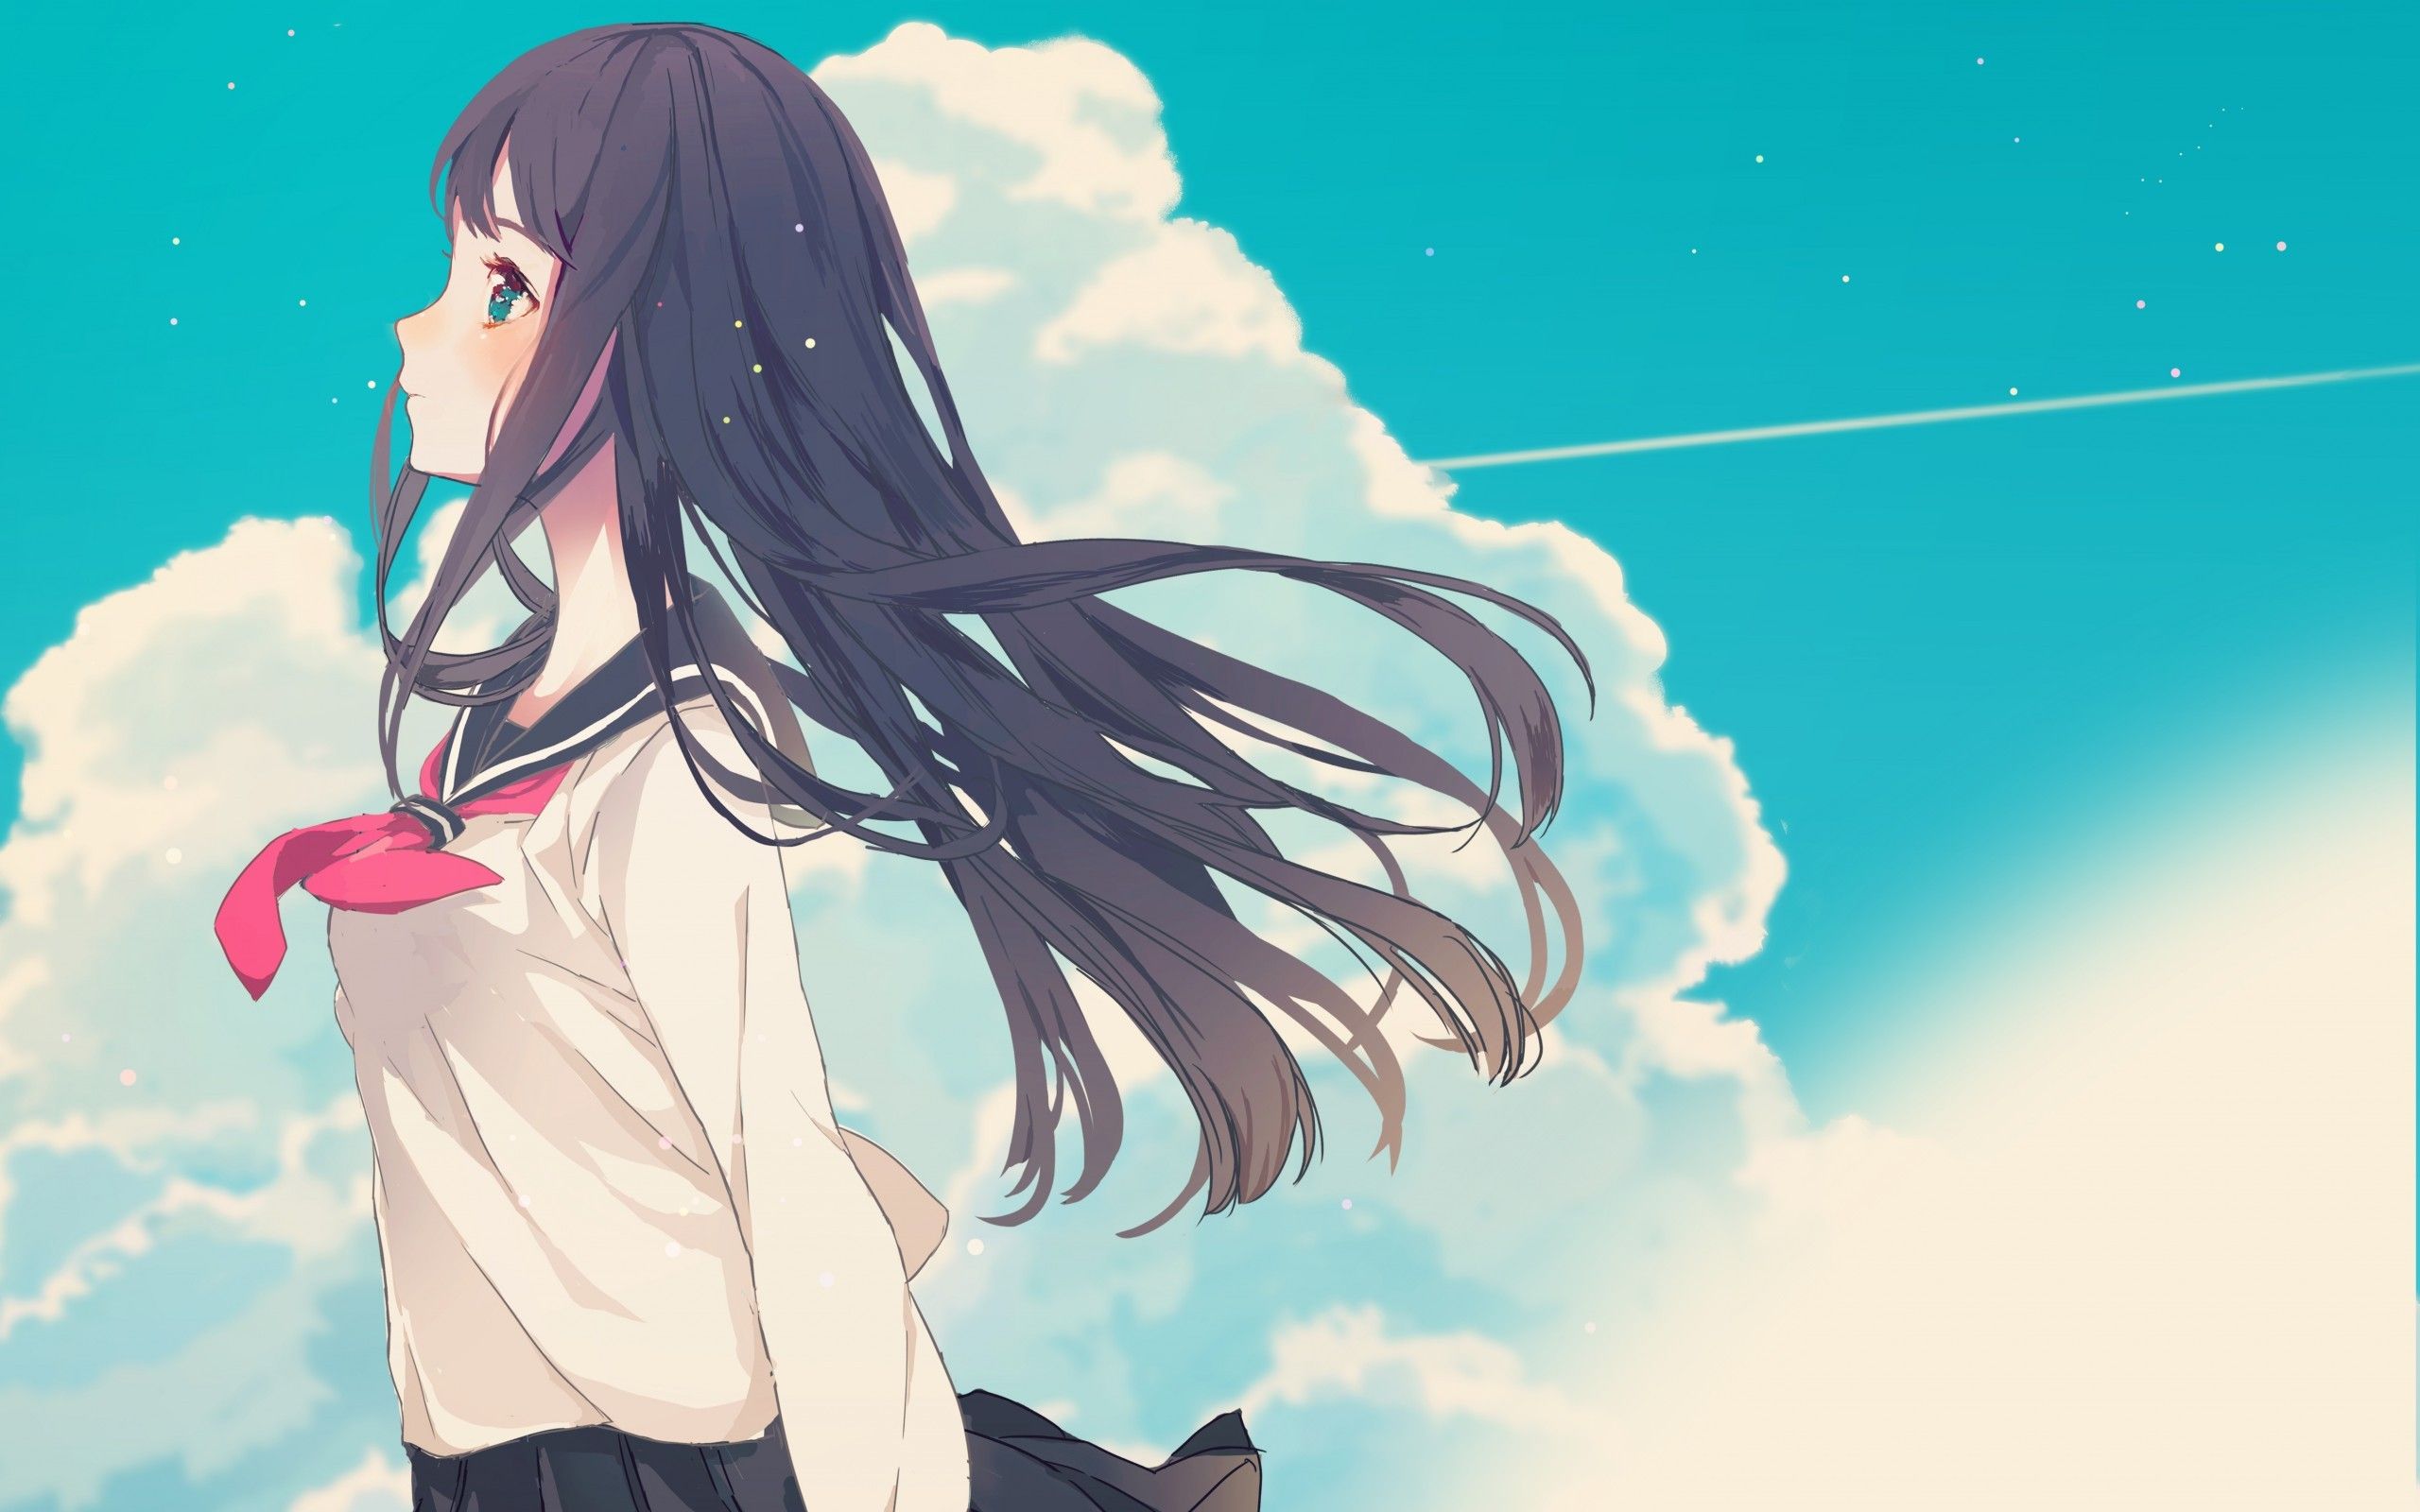 Download 2560x1600 Anime Girl, Profile View, School Uniform, Clouds, Sky Wallpaper for MacBook Pro 13 inch